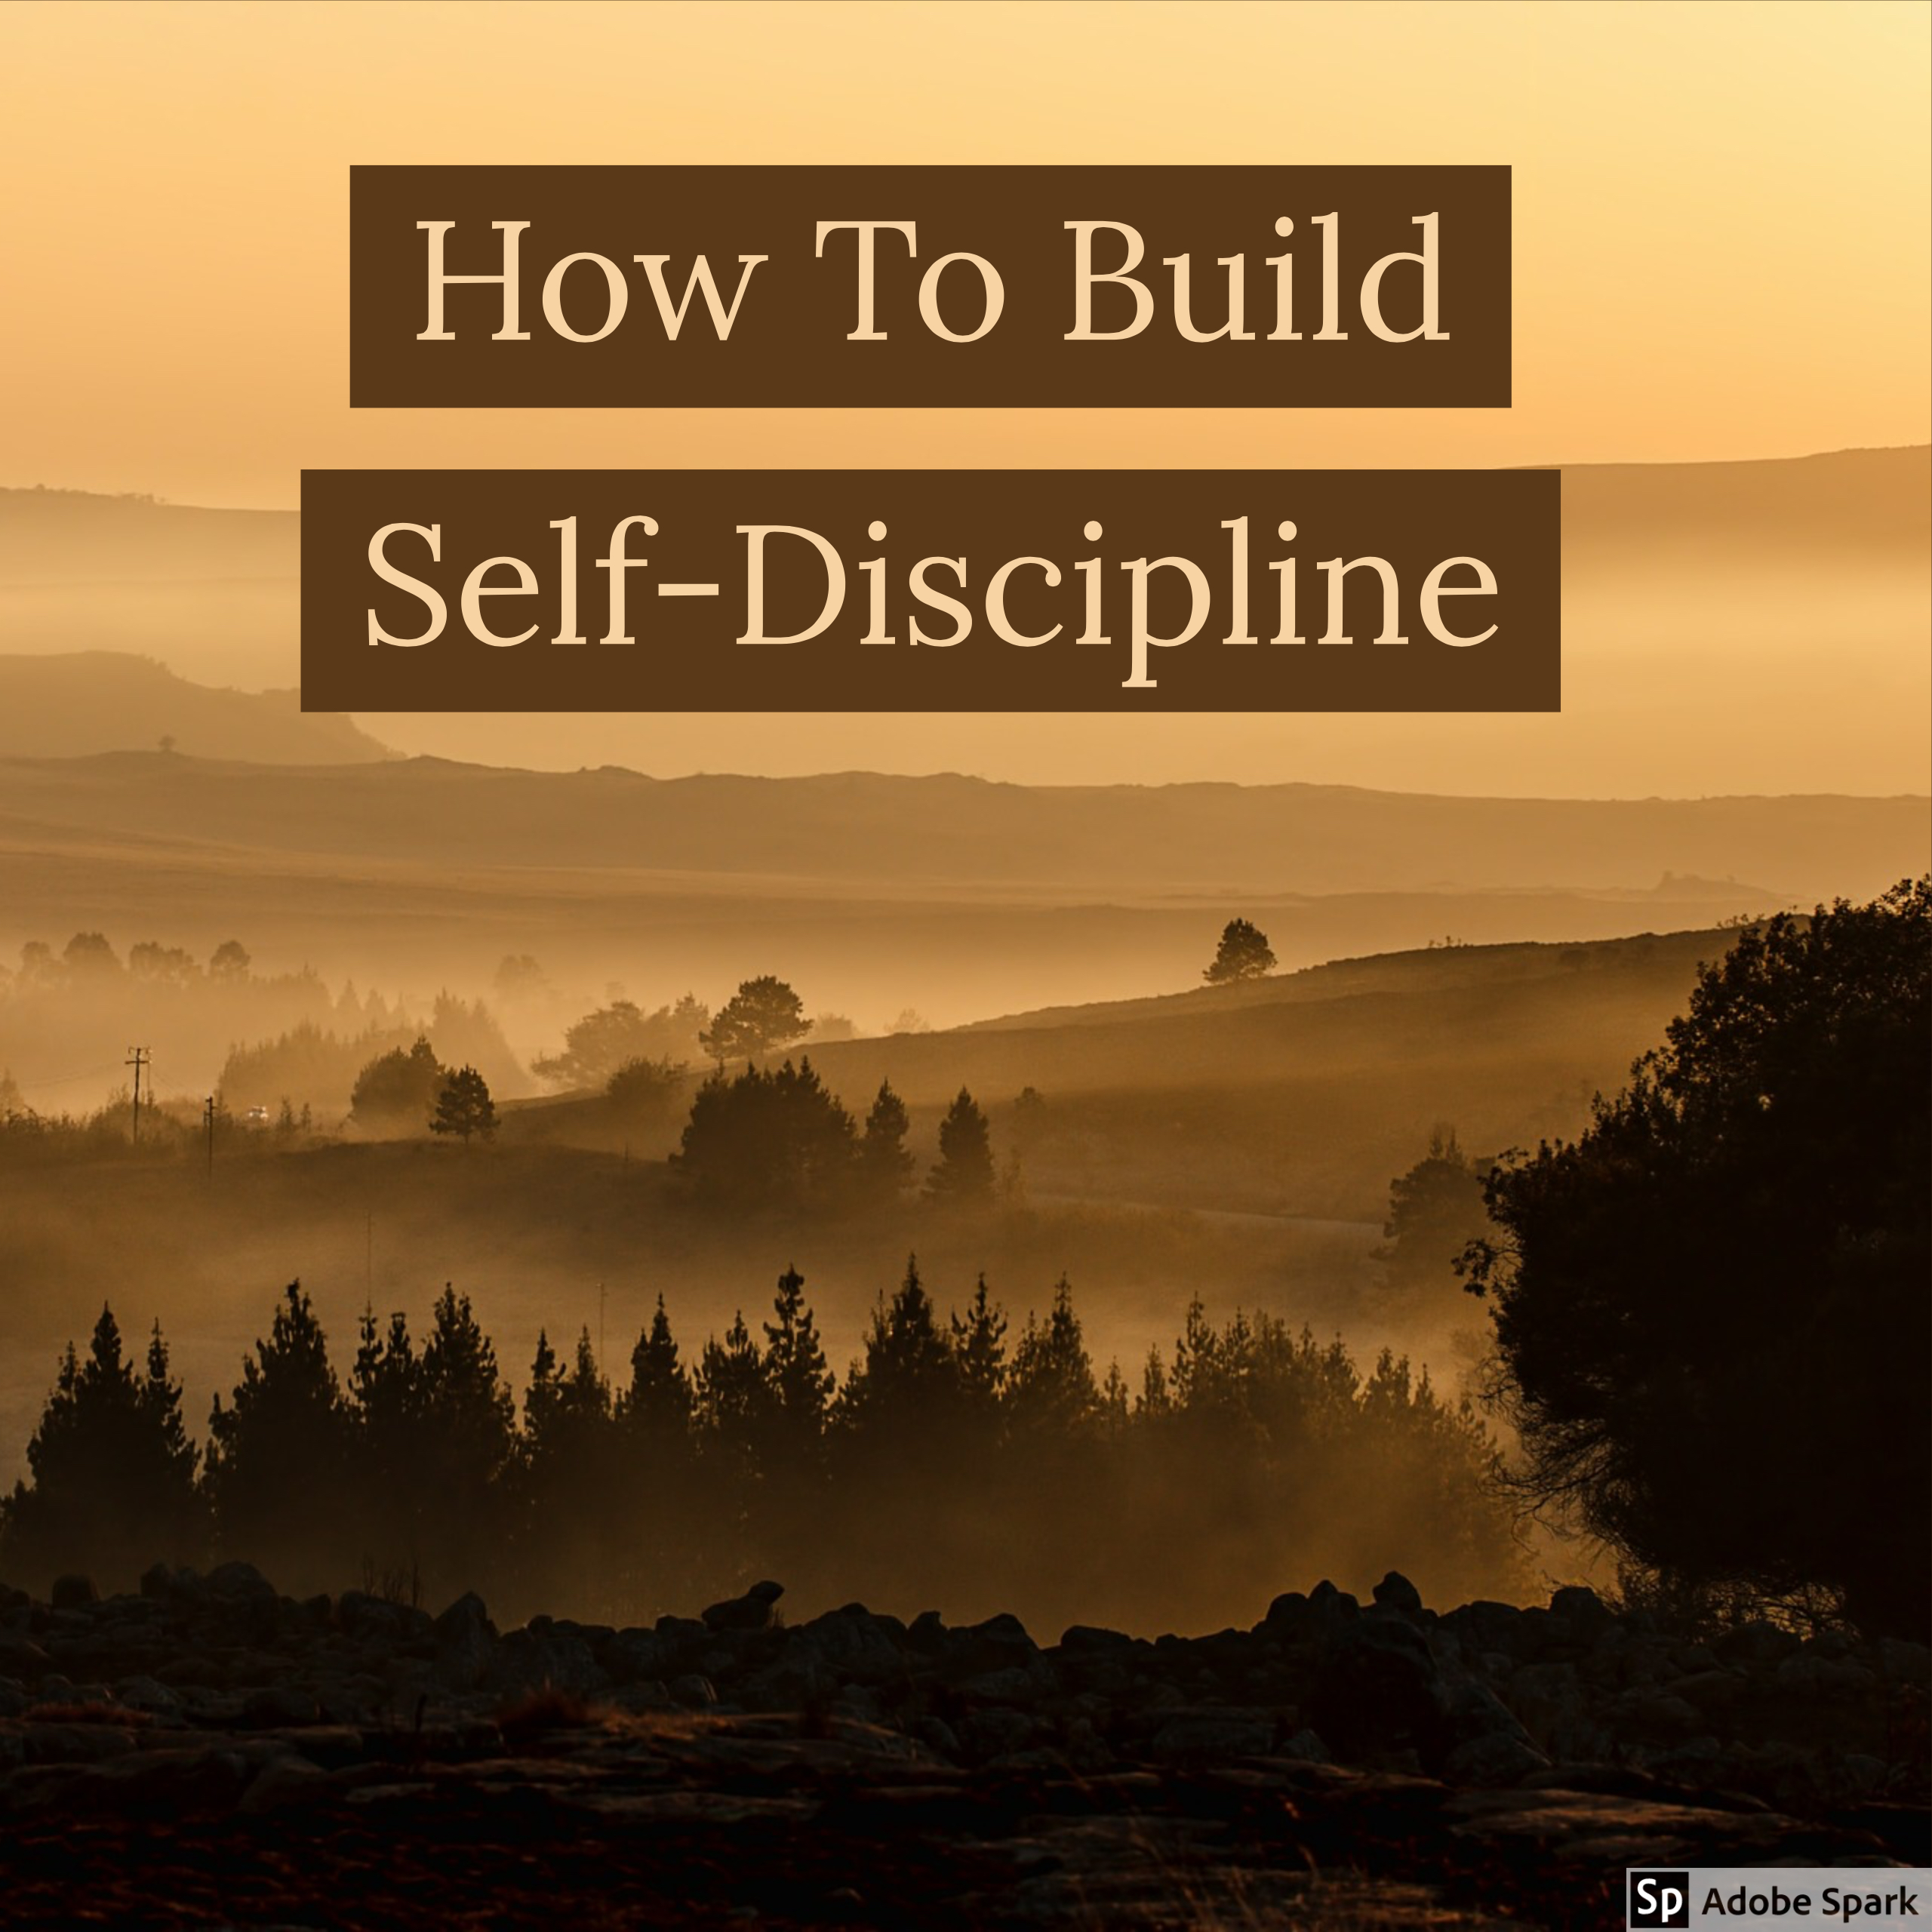 FREE: Self-Discipline: How To Build Self-Discipline: The 10 Most Effective Ways To Beat Procrastination, Develop Good Habits, And Finally Get The Life You Always Wanted by Deniz Basar